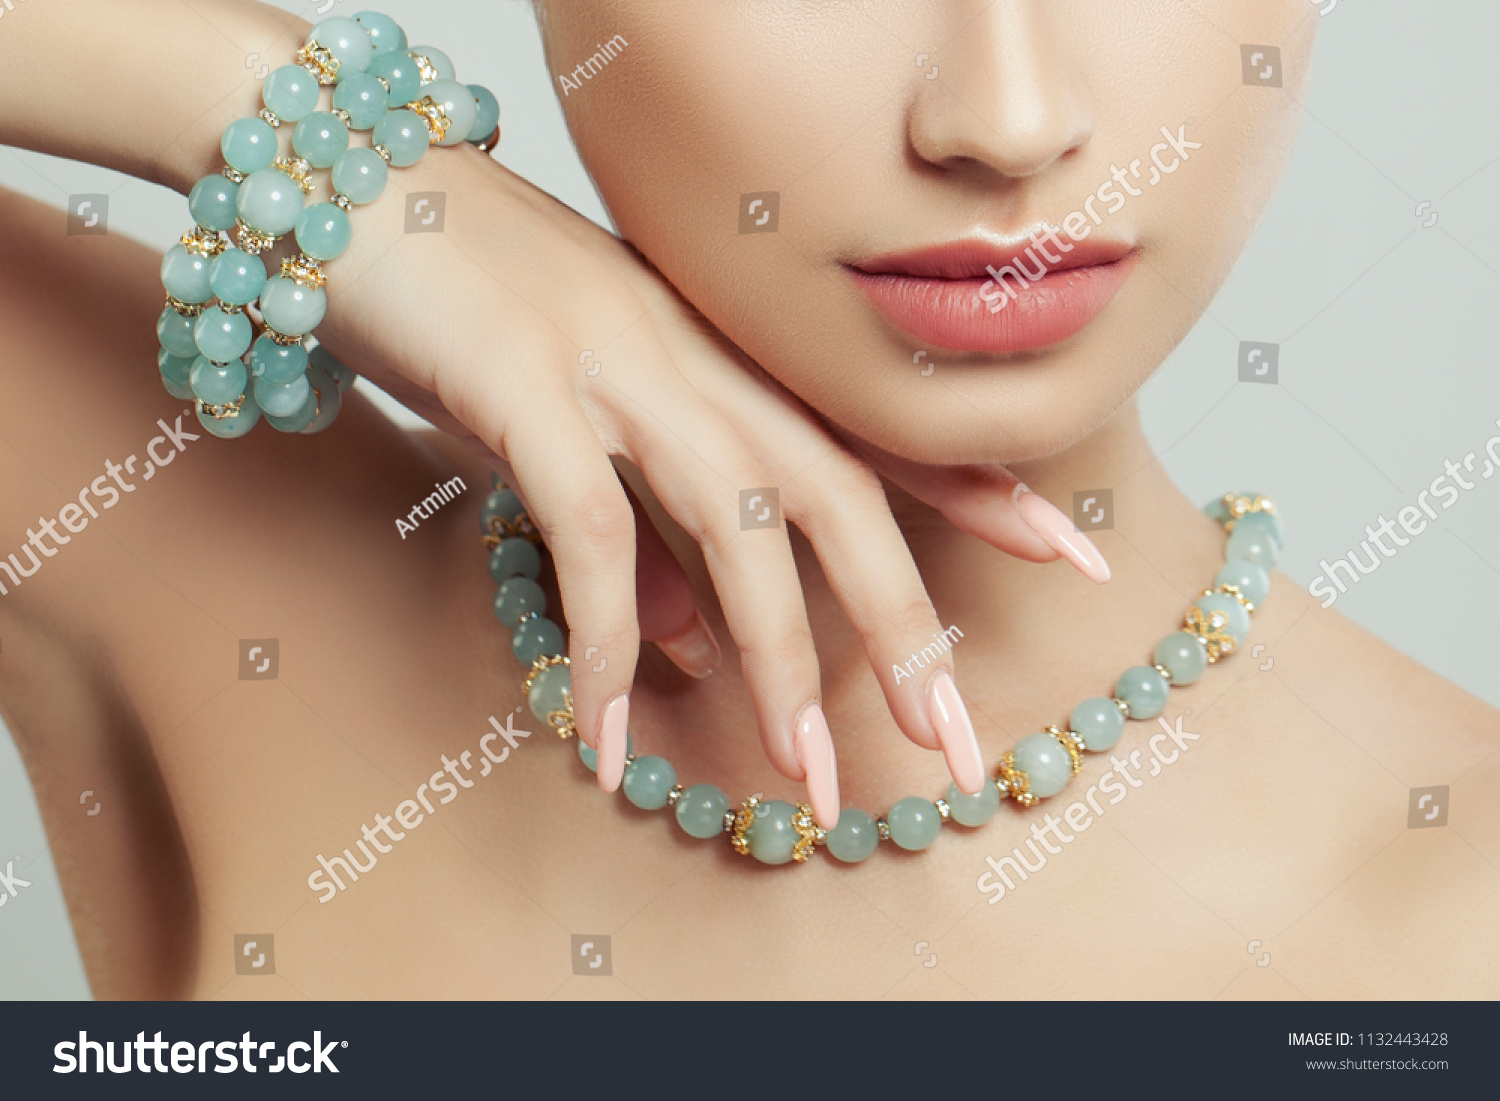 Perfect jewelry on female body, closeup portrait. Bracelet, necklace and manicure #1132443428